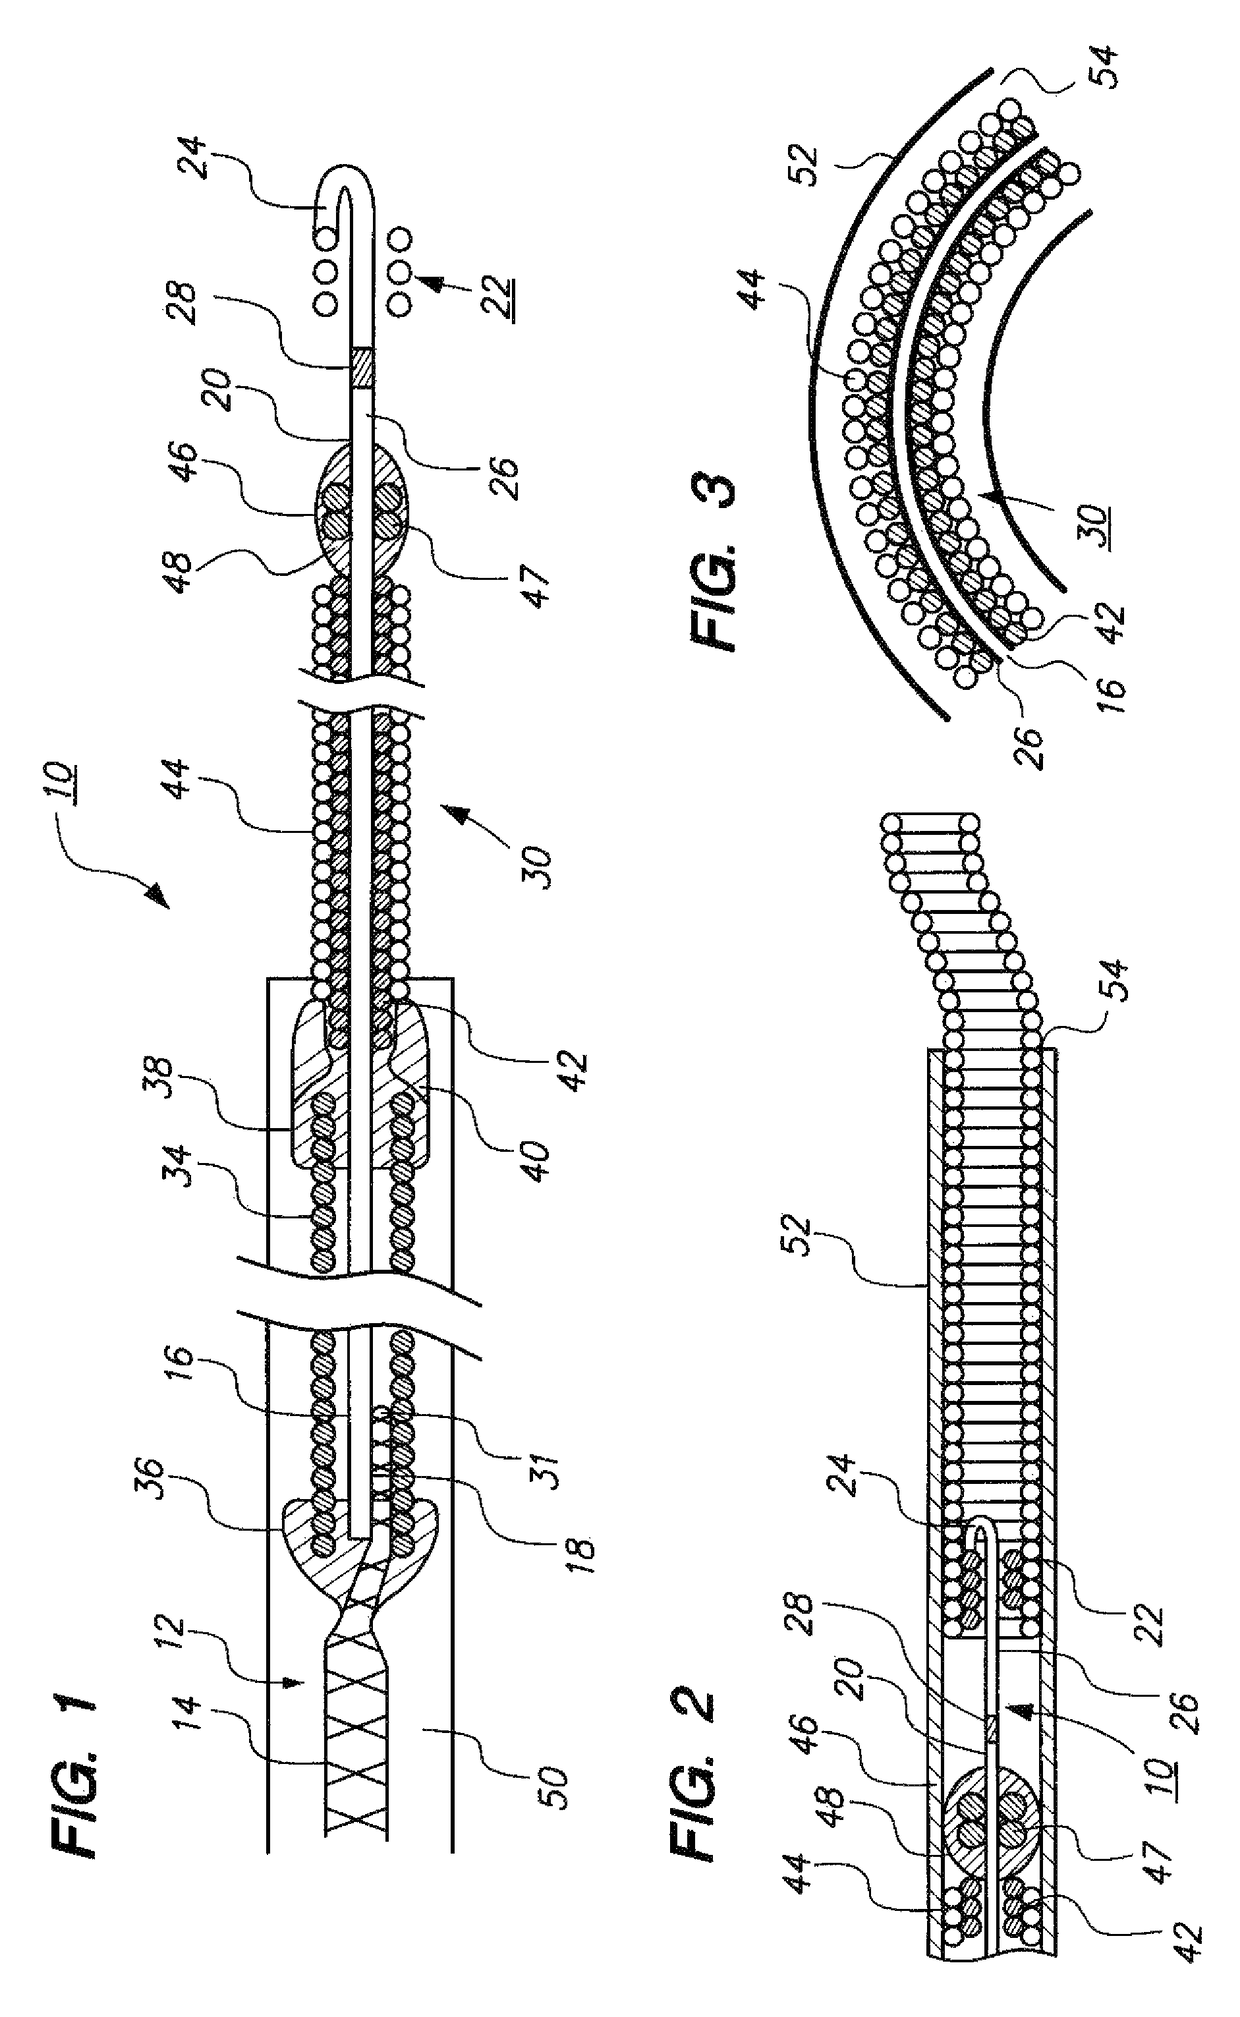 Vaso-occlusive delivery device with kink resistant, flexible distal end